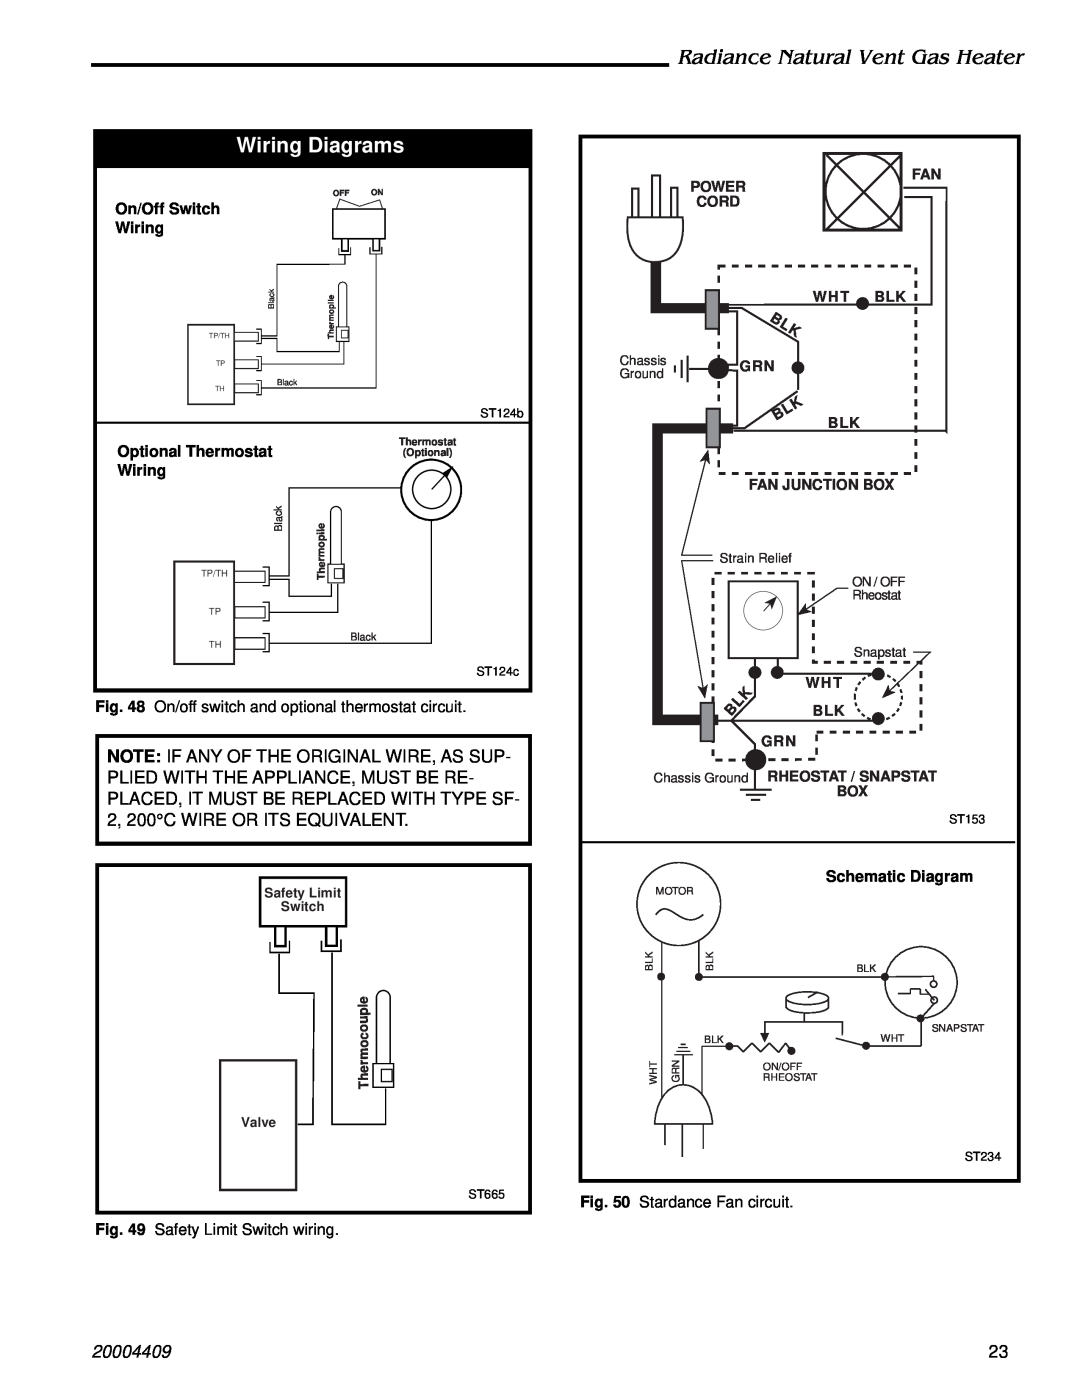 Vermont Casting 3355 Wiring Diagrams, Radiance Natural Vent Gas Heater, 20004409, Schematic Diagram, Fan Junction Box 